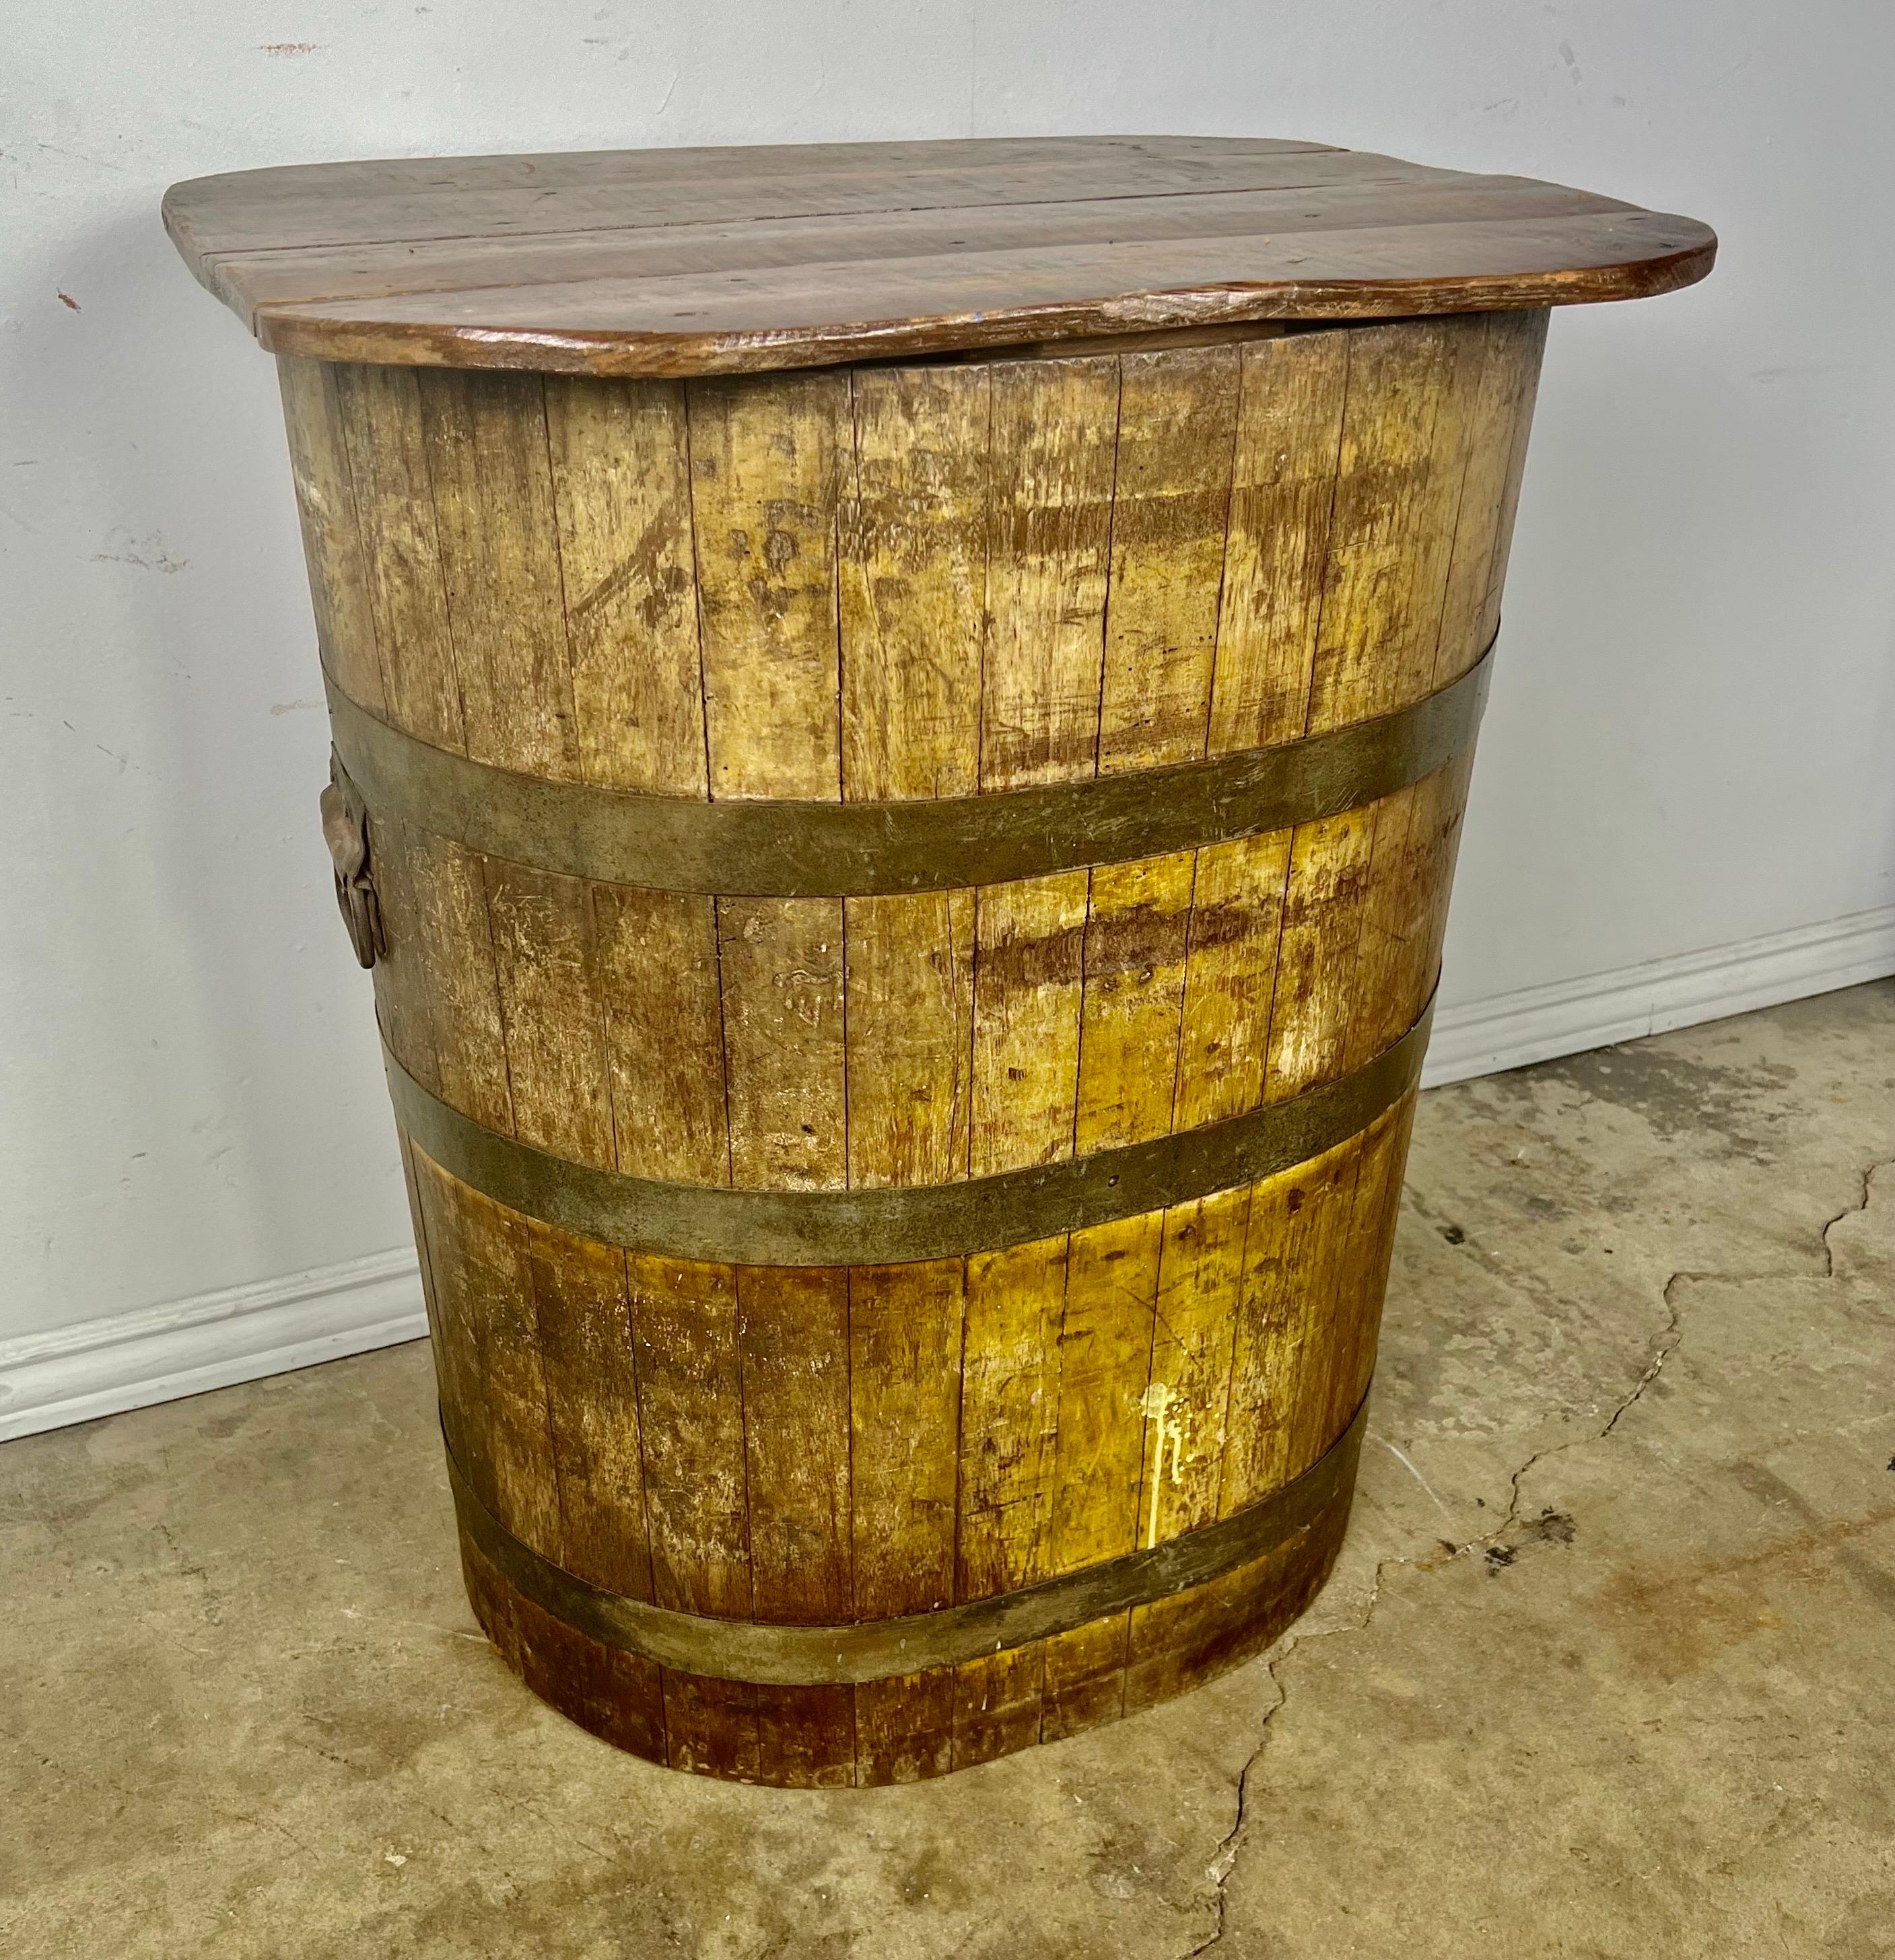 Vintage Japanese Saki Barrel Table In Distressed Condition For Sale In Los Angeles, CA